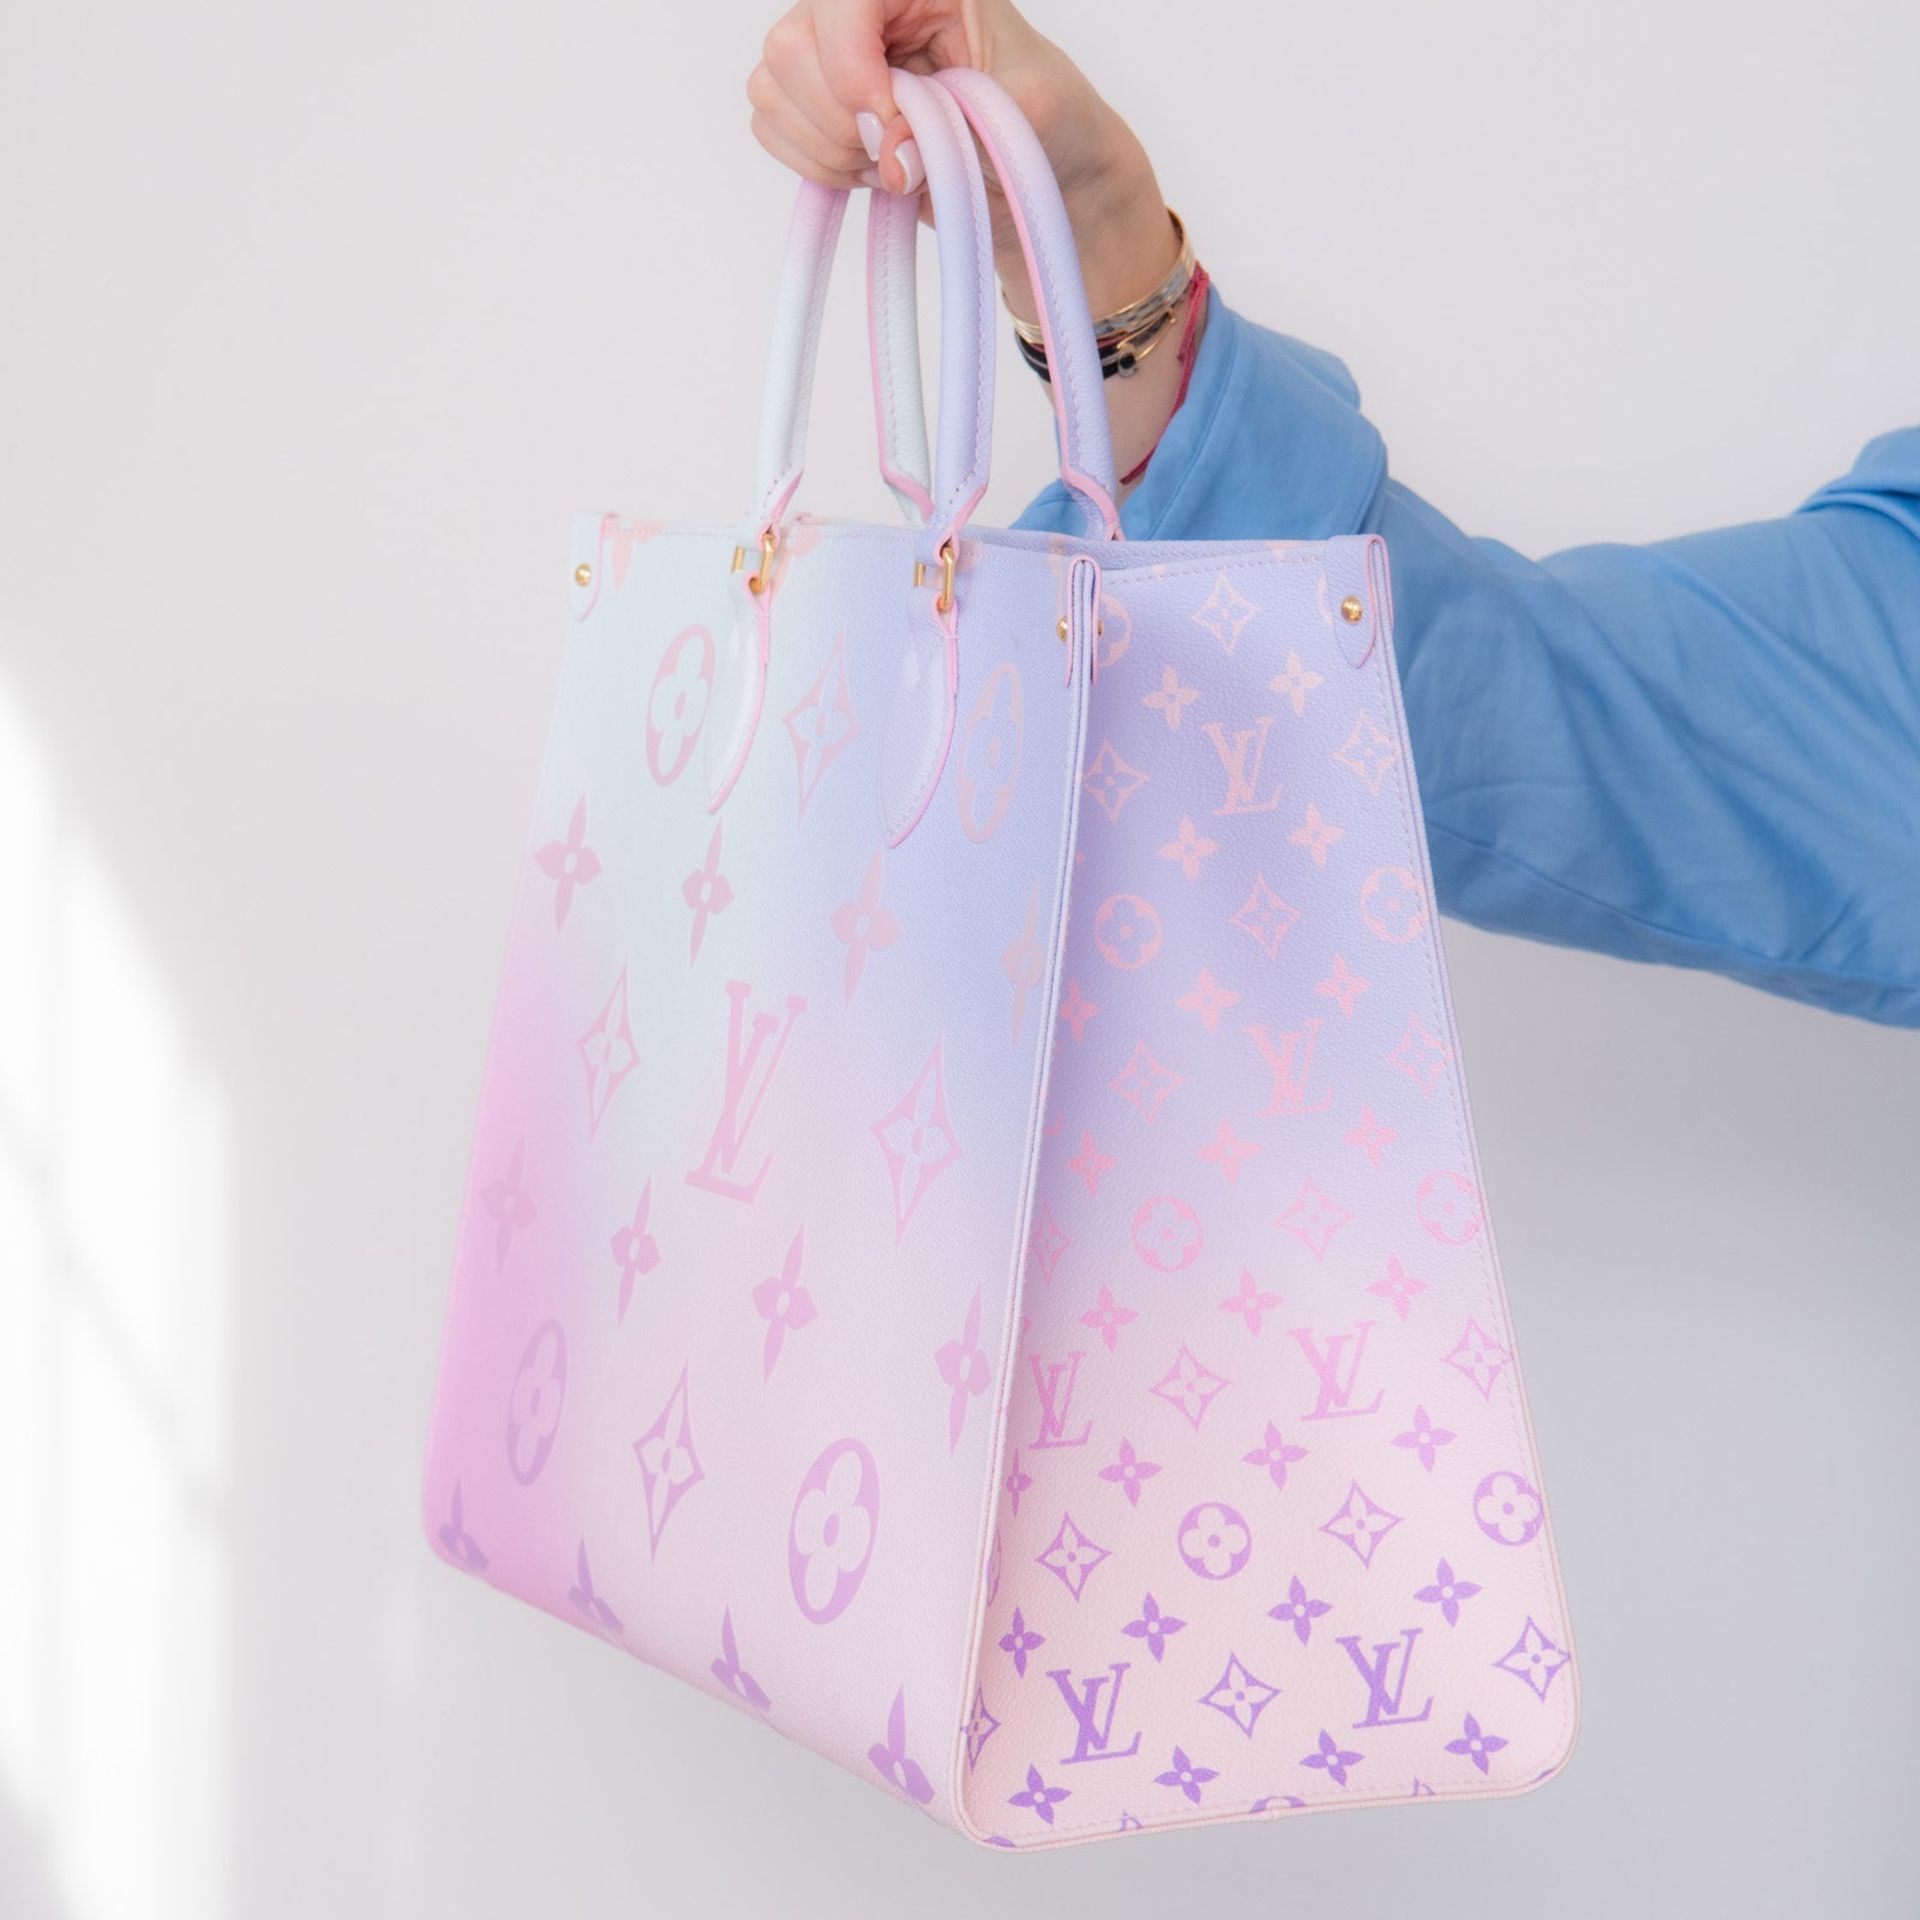 Louis Vuitton Limited Edition On The Go Sunrise Pastel Tote Bag - Image 6 of 15